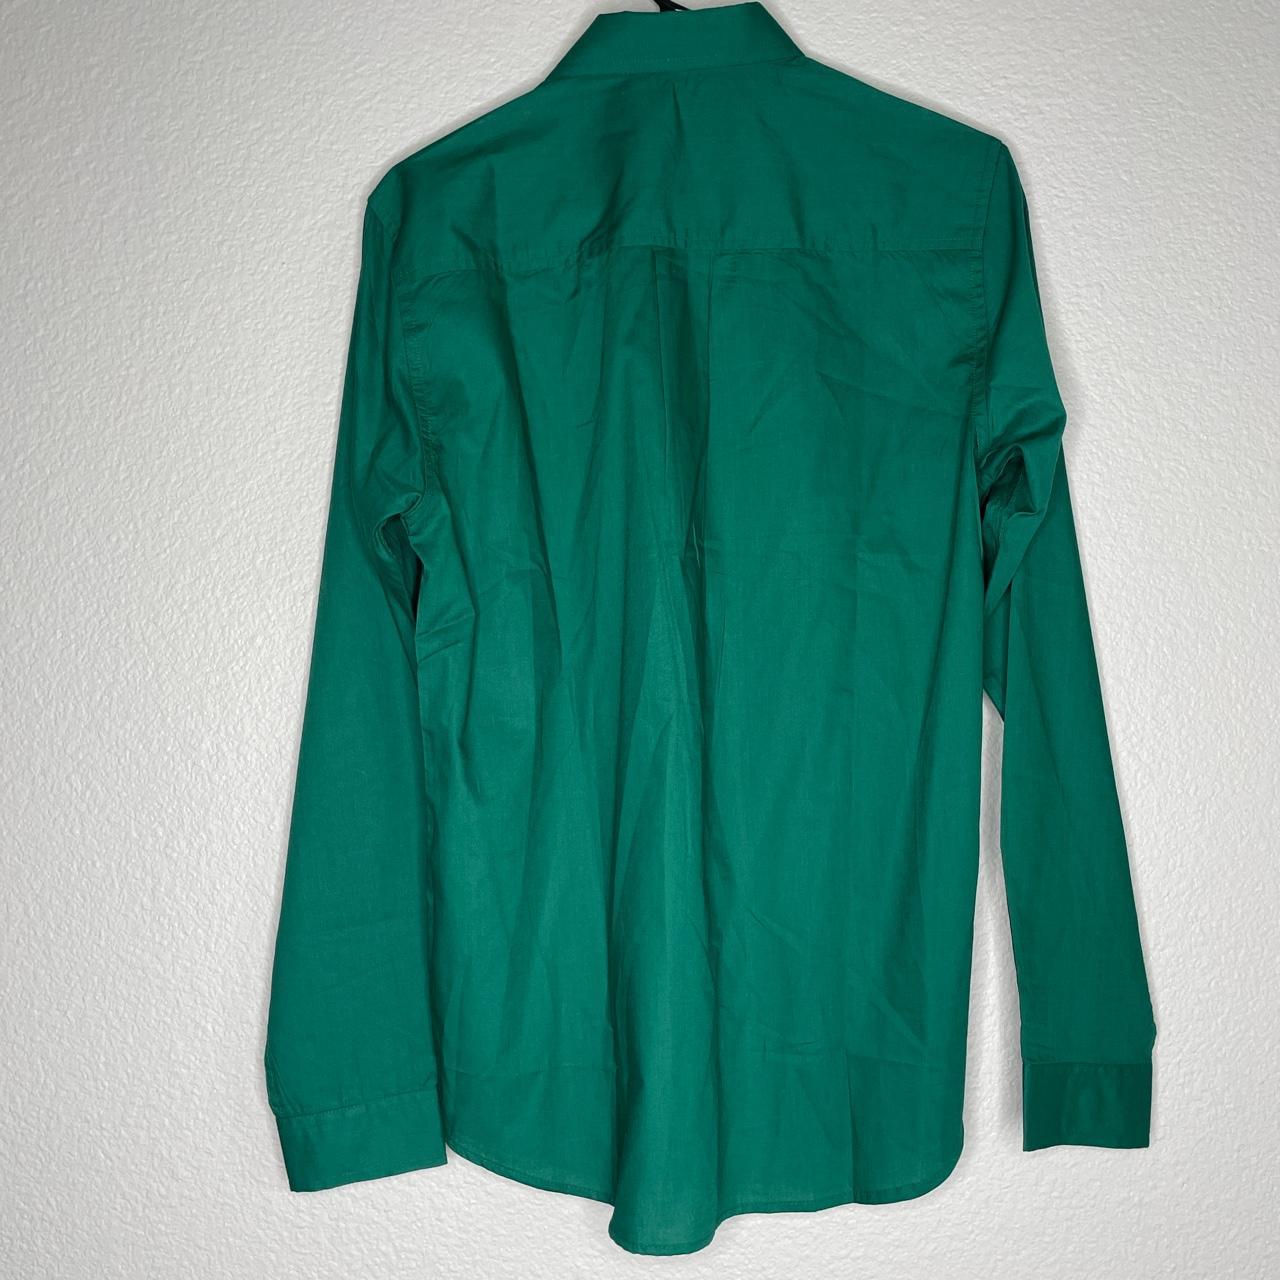 Product Image 2 - #bolongarotrevor #small #green #button up